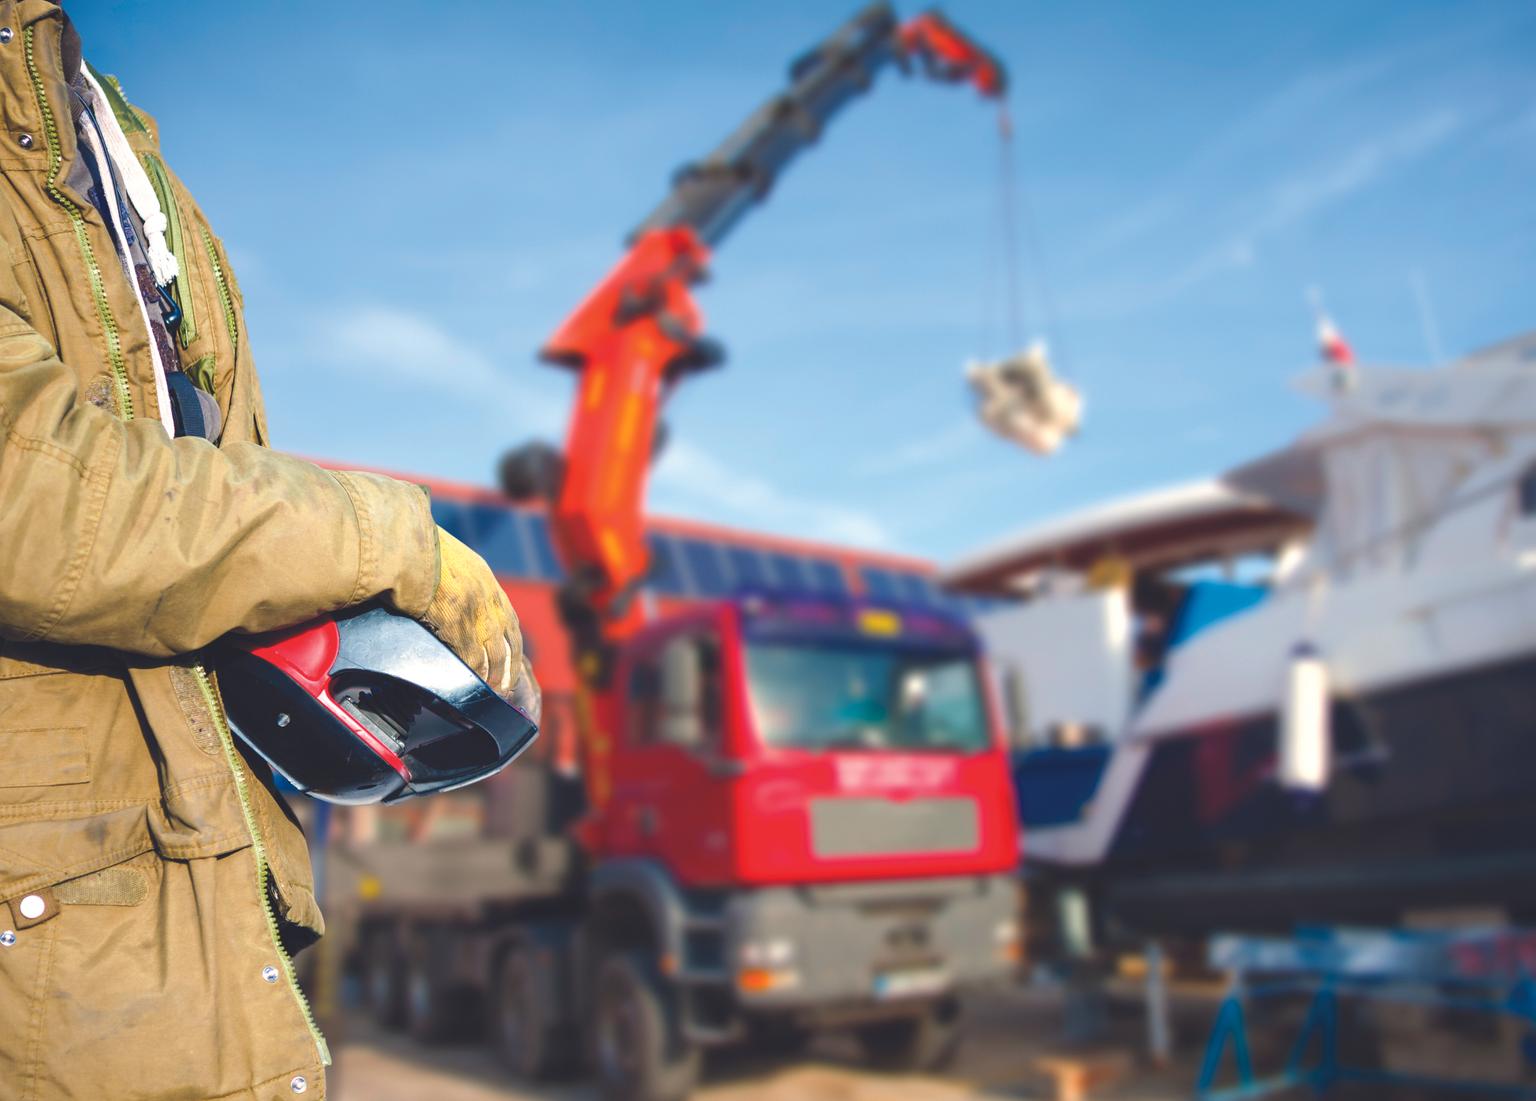 Construction site worker holding a work helmet, with a crane lifting objects in the background